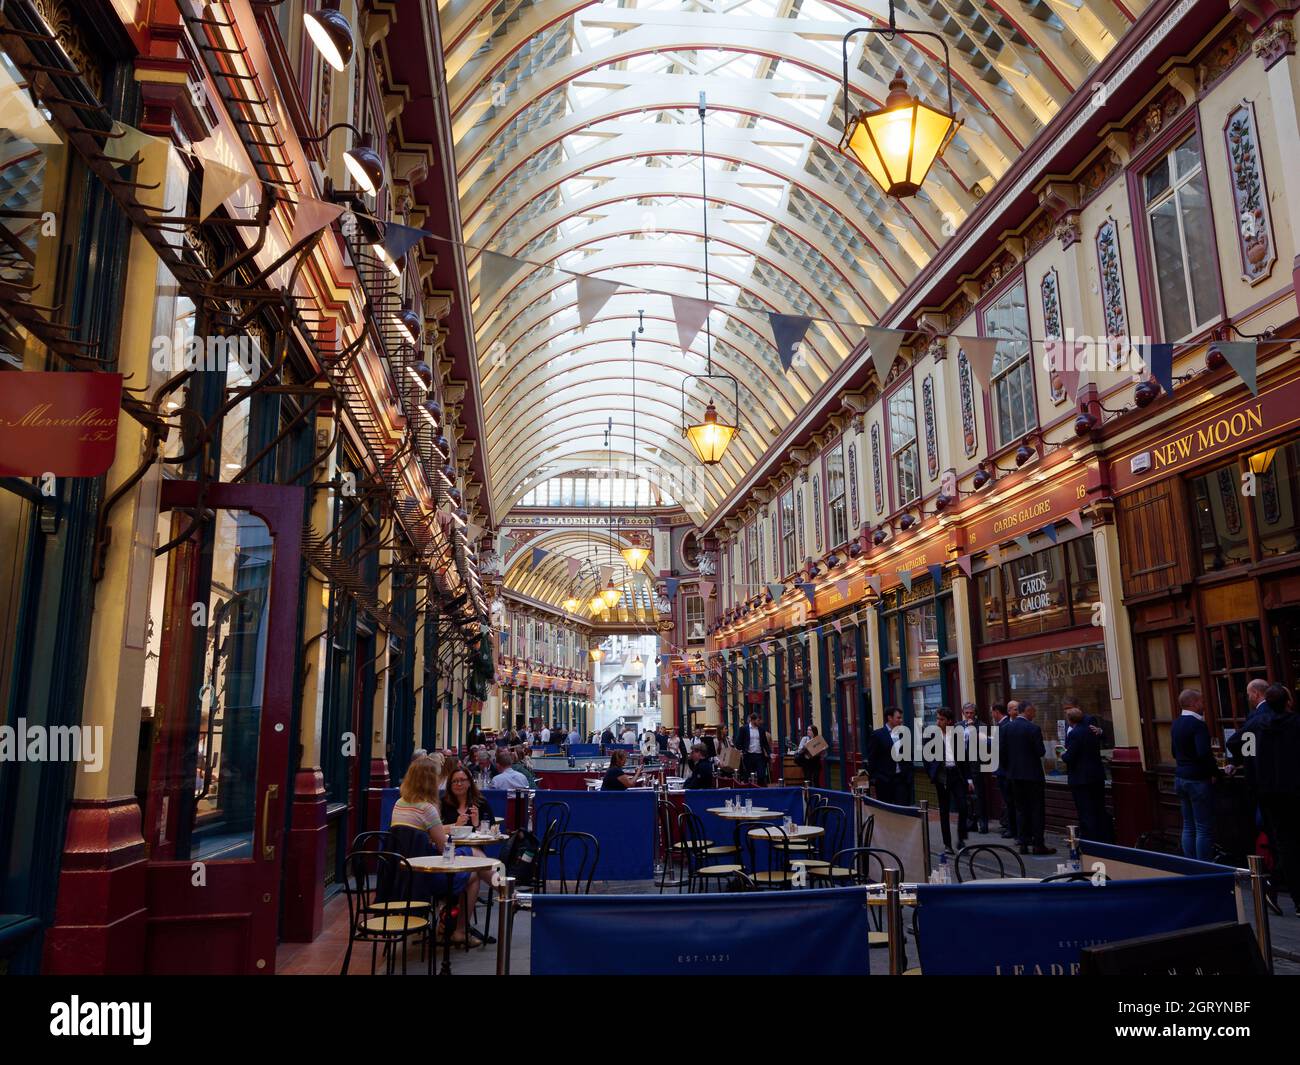 London, Greater London, England, September 21 2021: Leadenhall Market a covered market in the City of London dating from the 14th Century Stock Photo